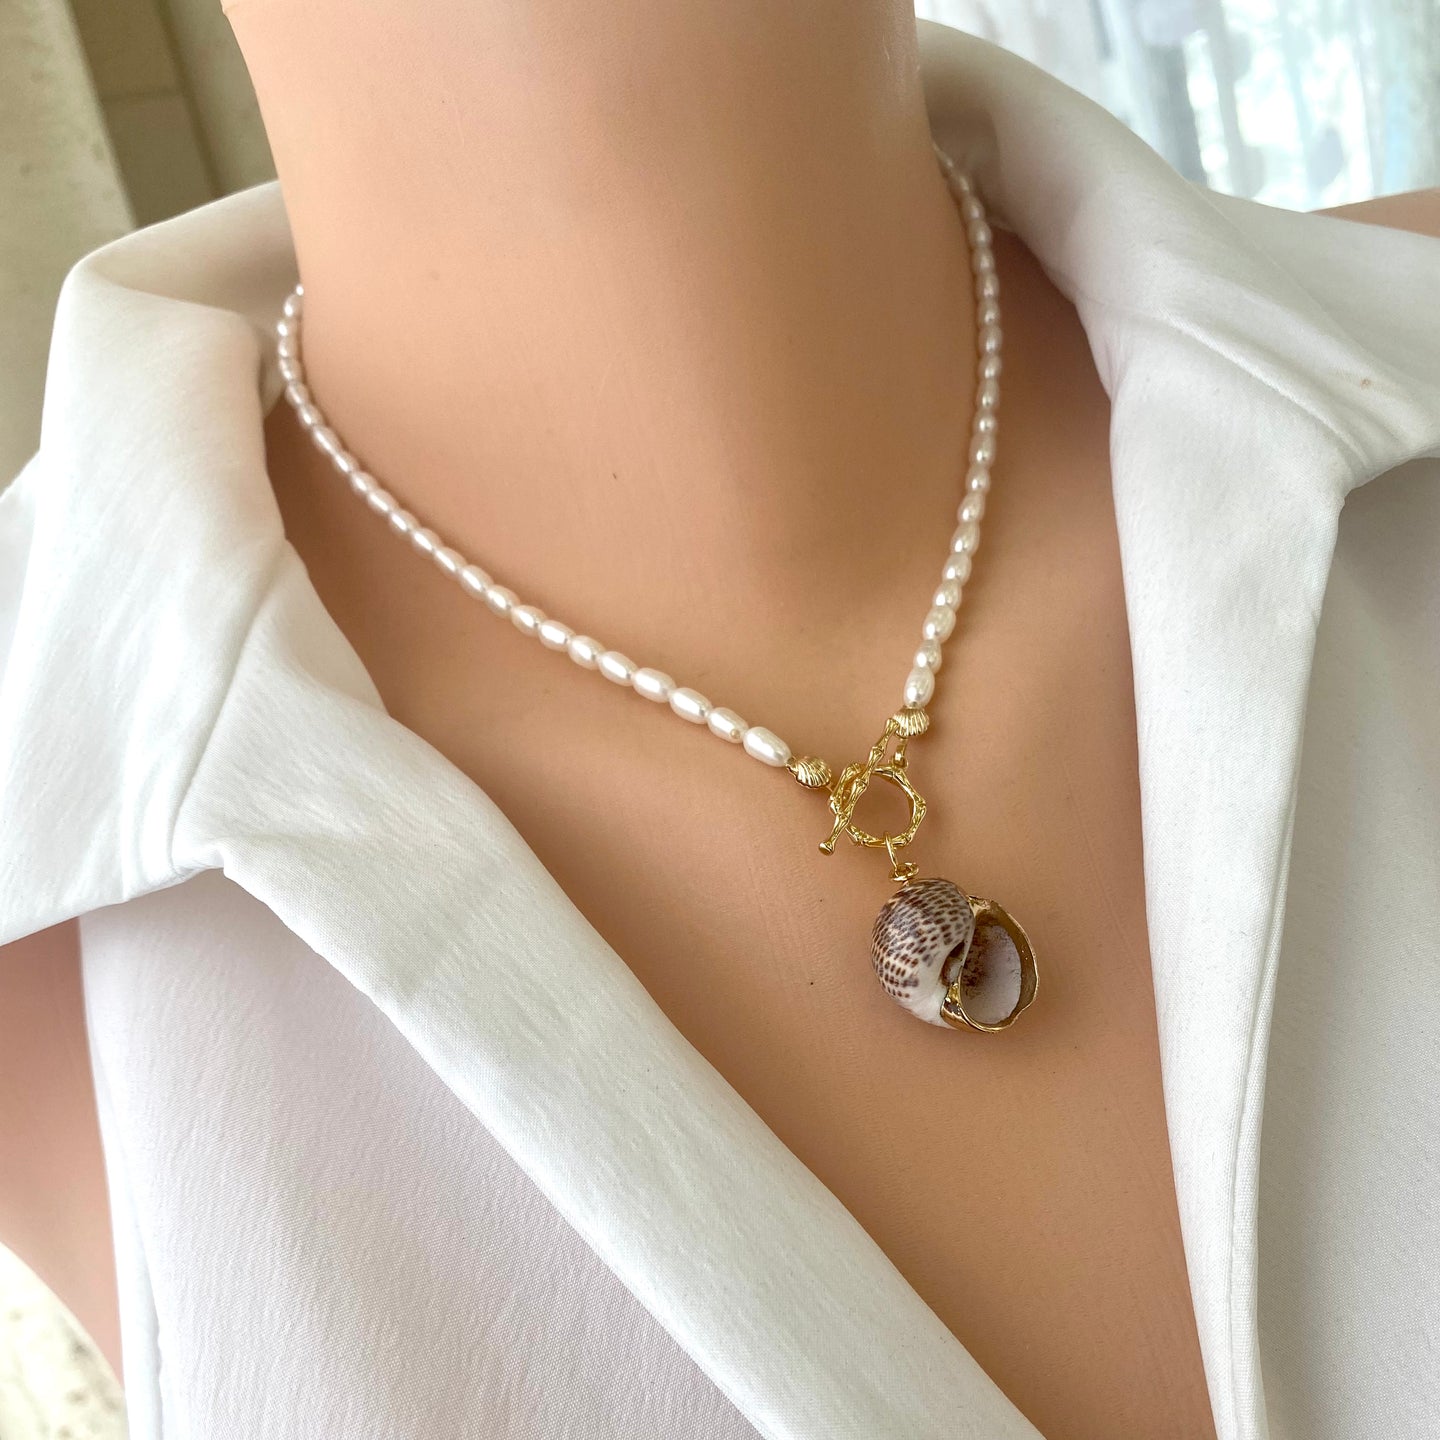 Real Seashell and Freshwater Pearl Necklace, Baroque Pearl & White Shell Pendant, 16”-19